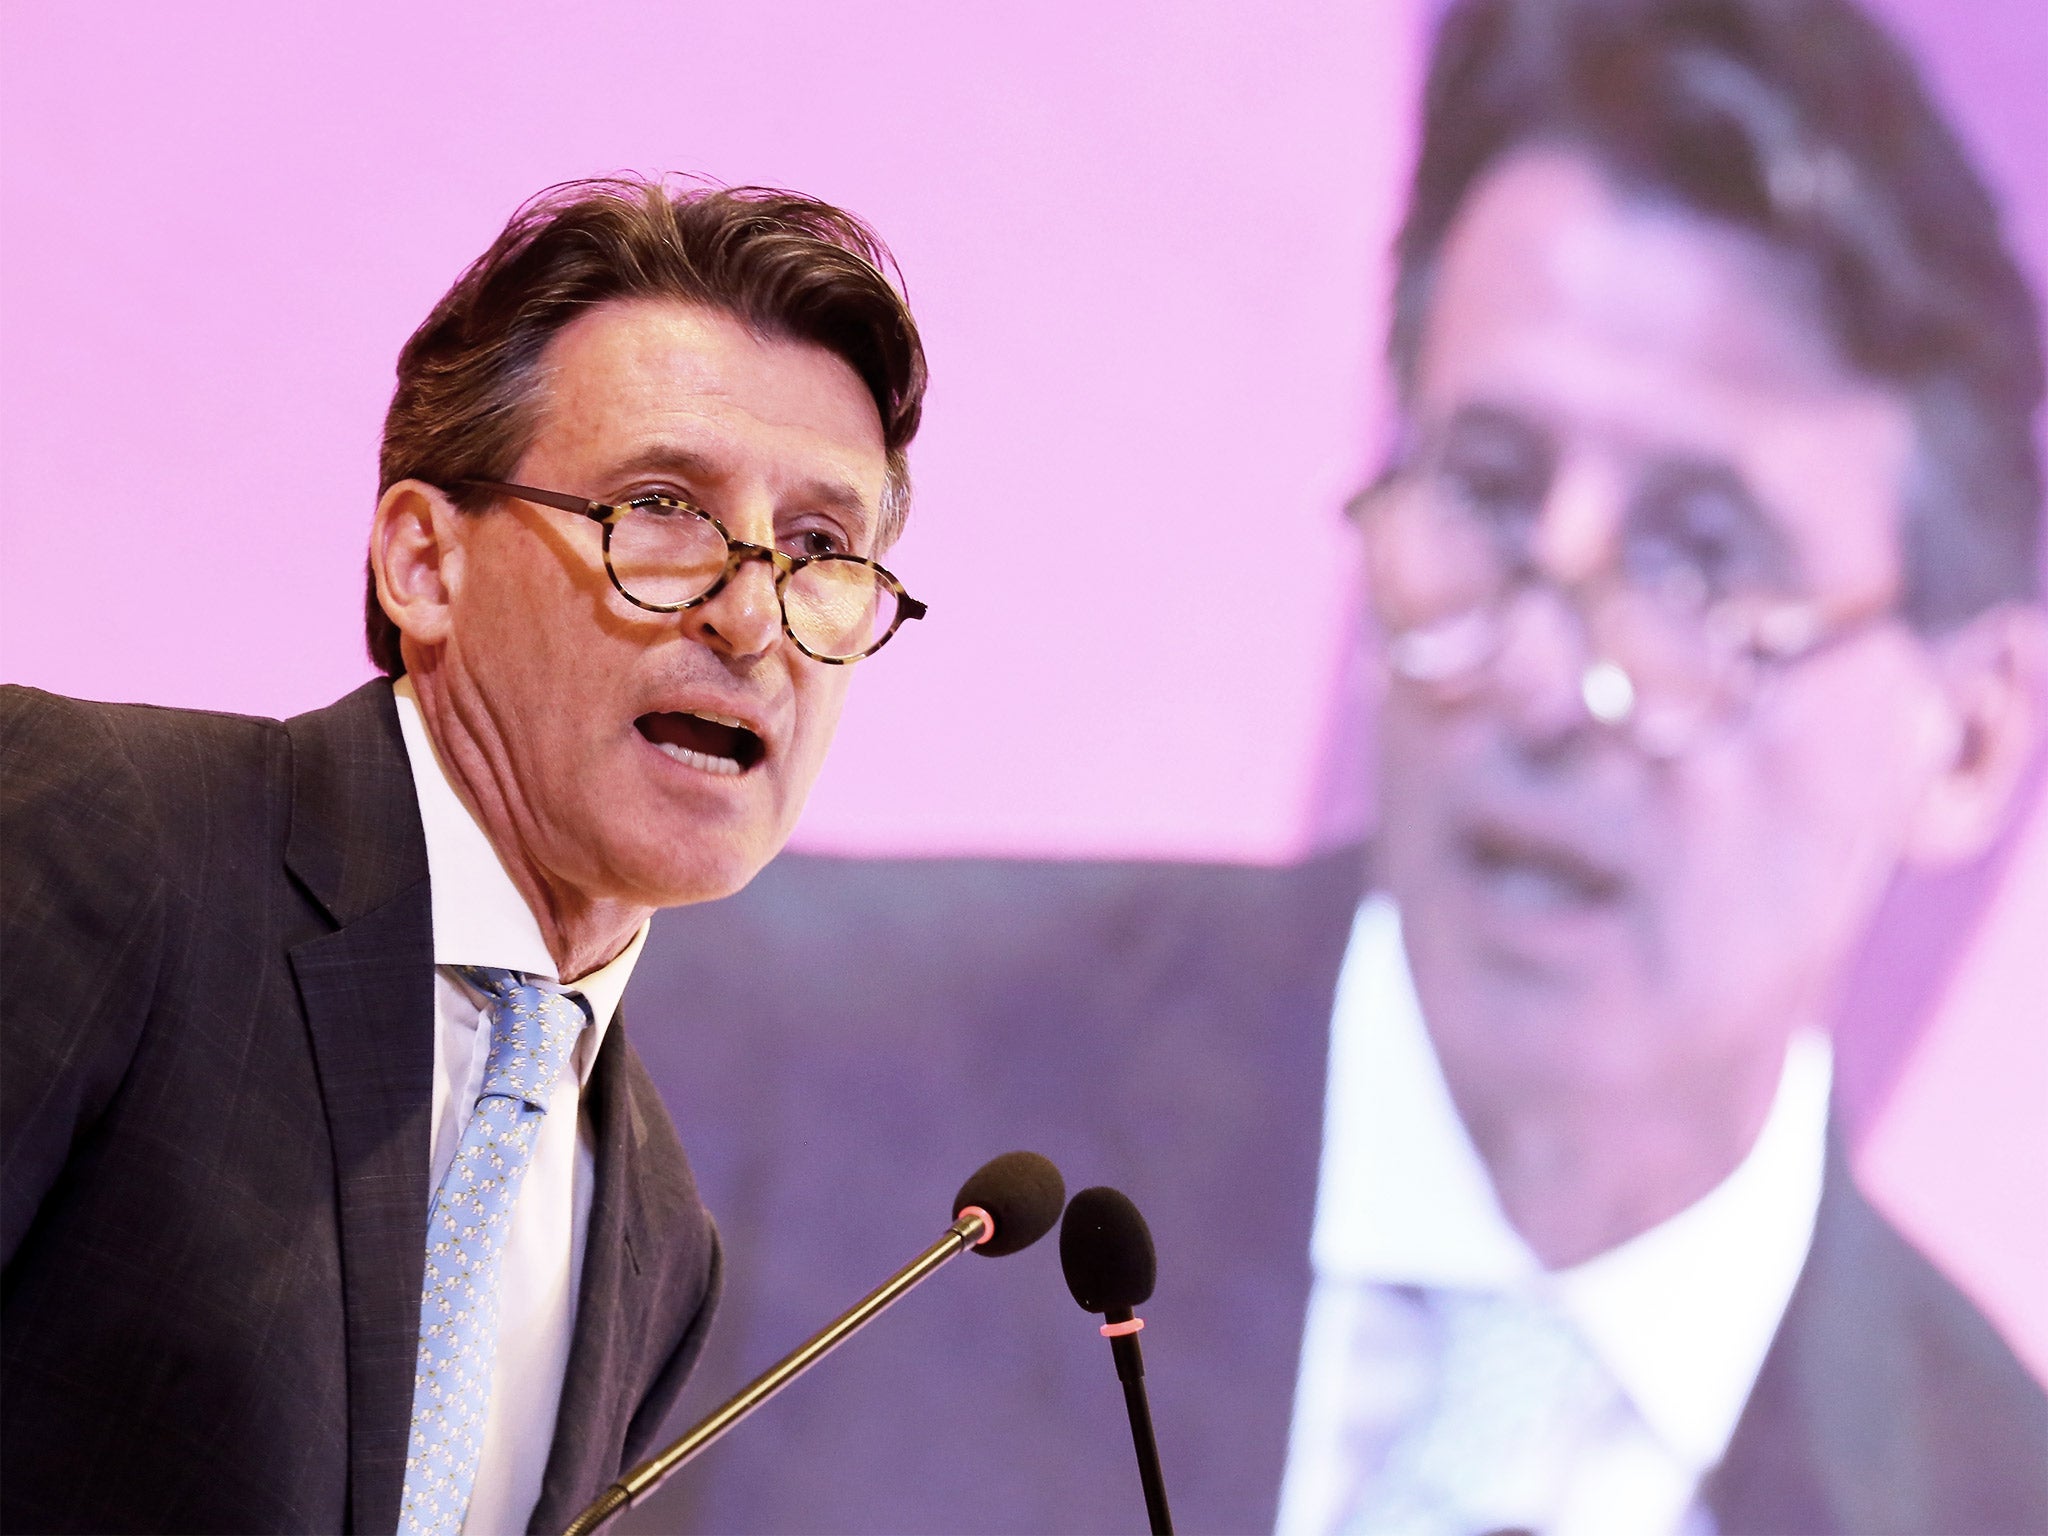 Lord Coe addresses the delegates after being elected the new president of the IAAF in Beijing